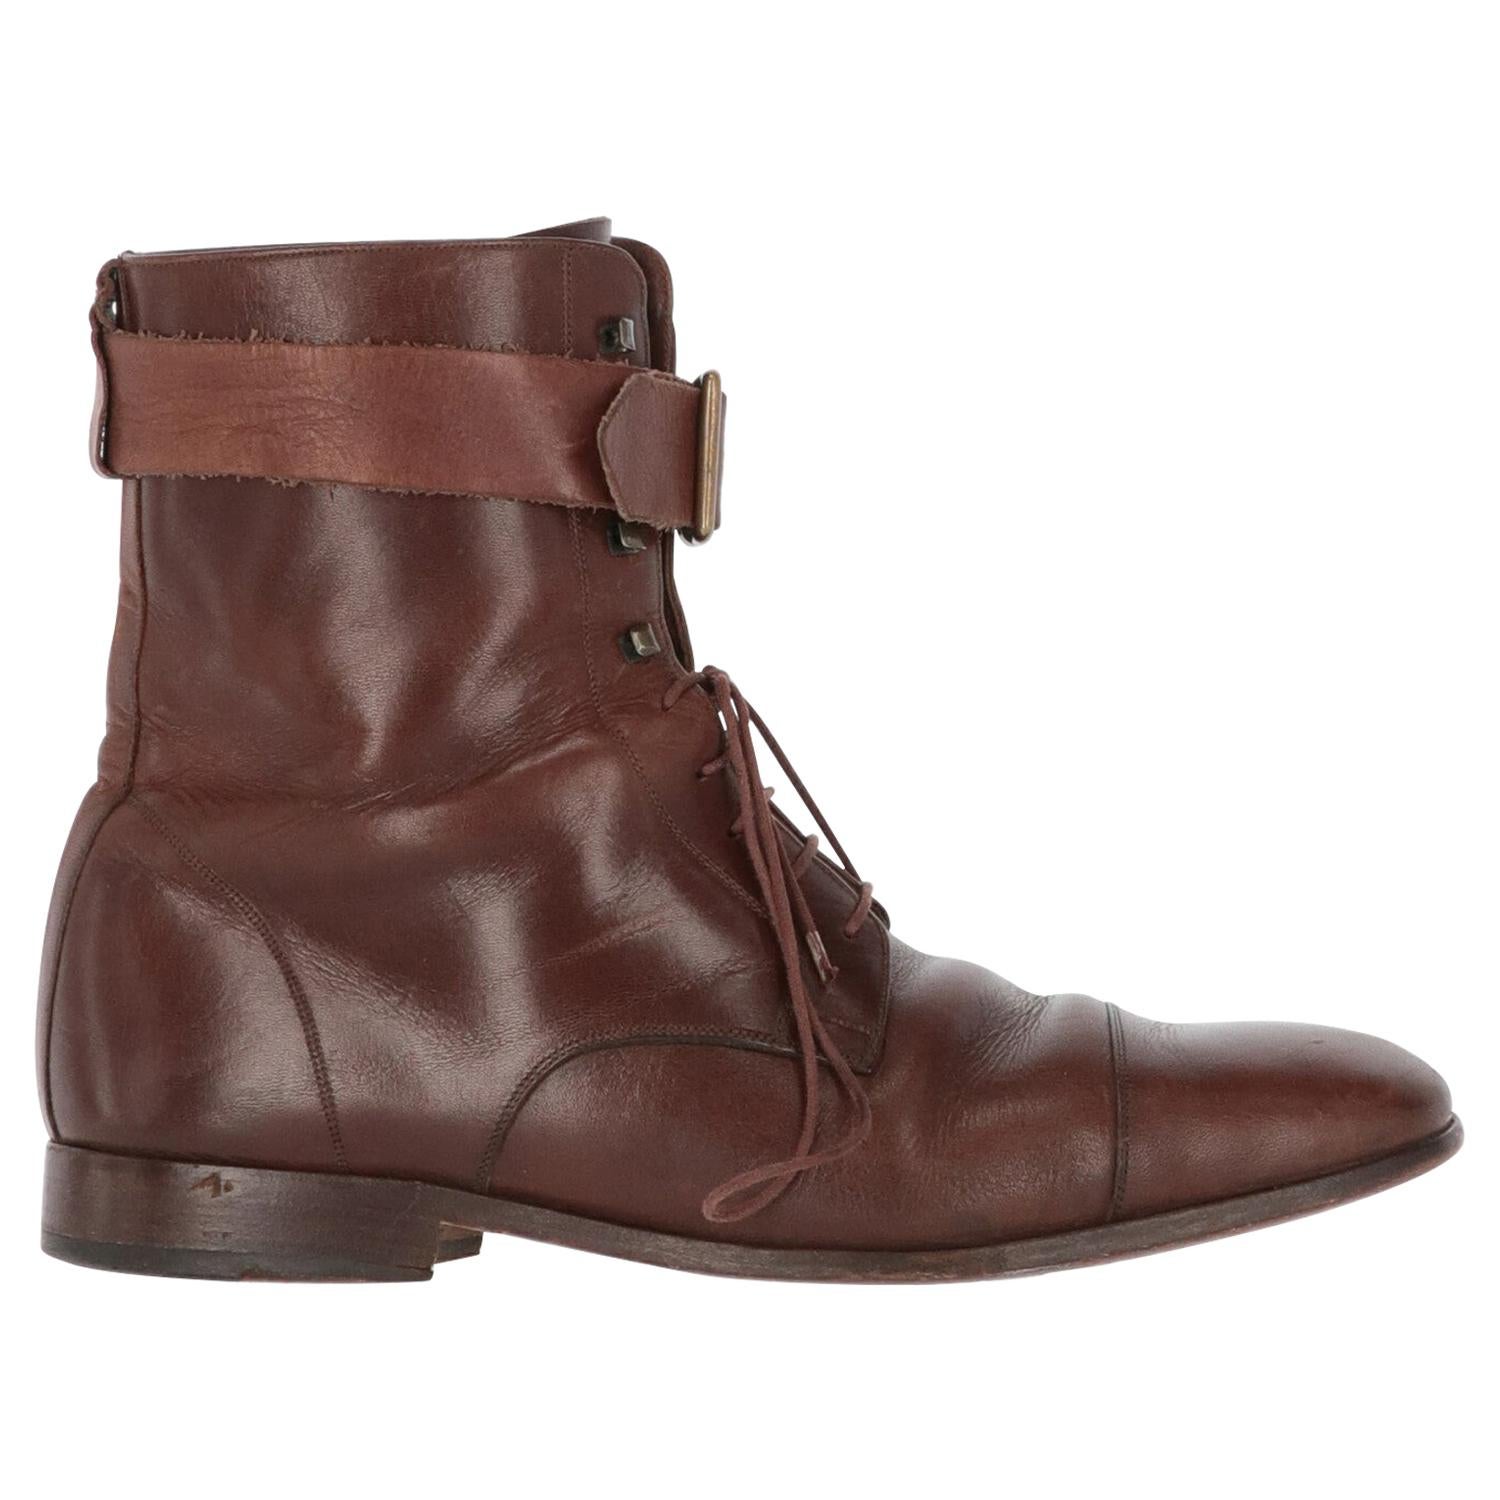 2000s Dolce & Gabbana Brown Leather Lace-up Boots